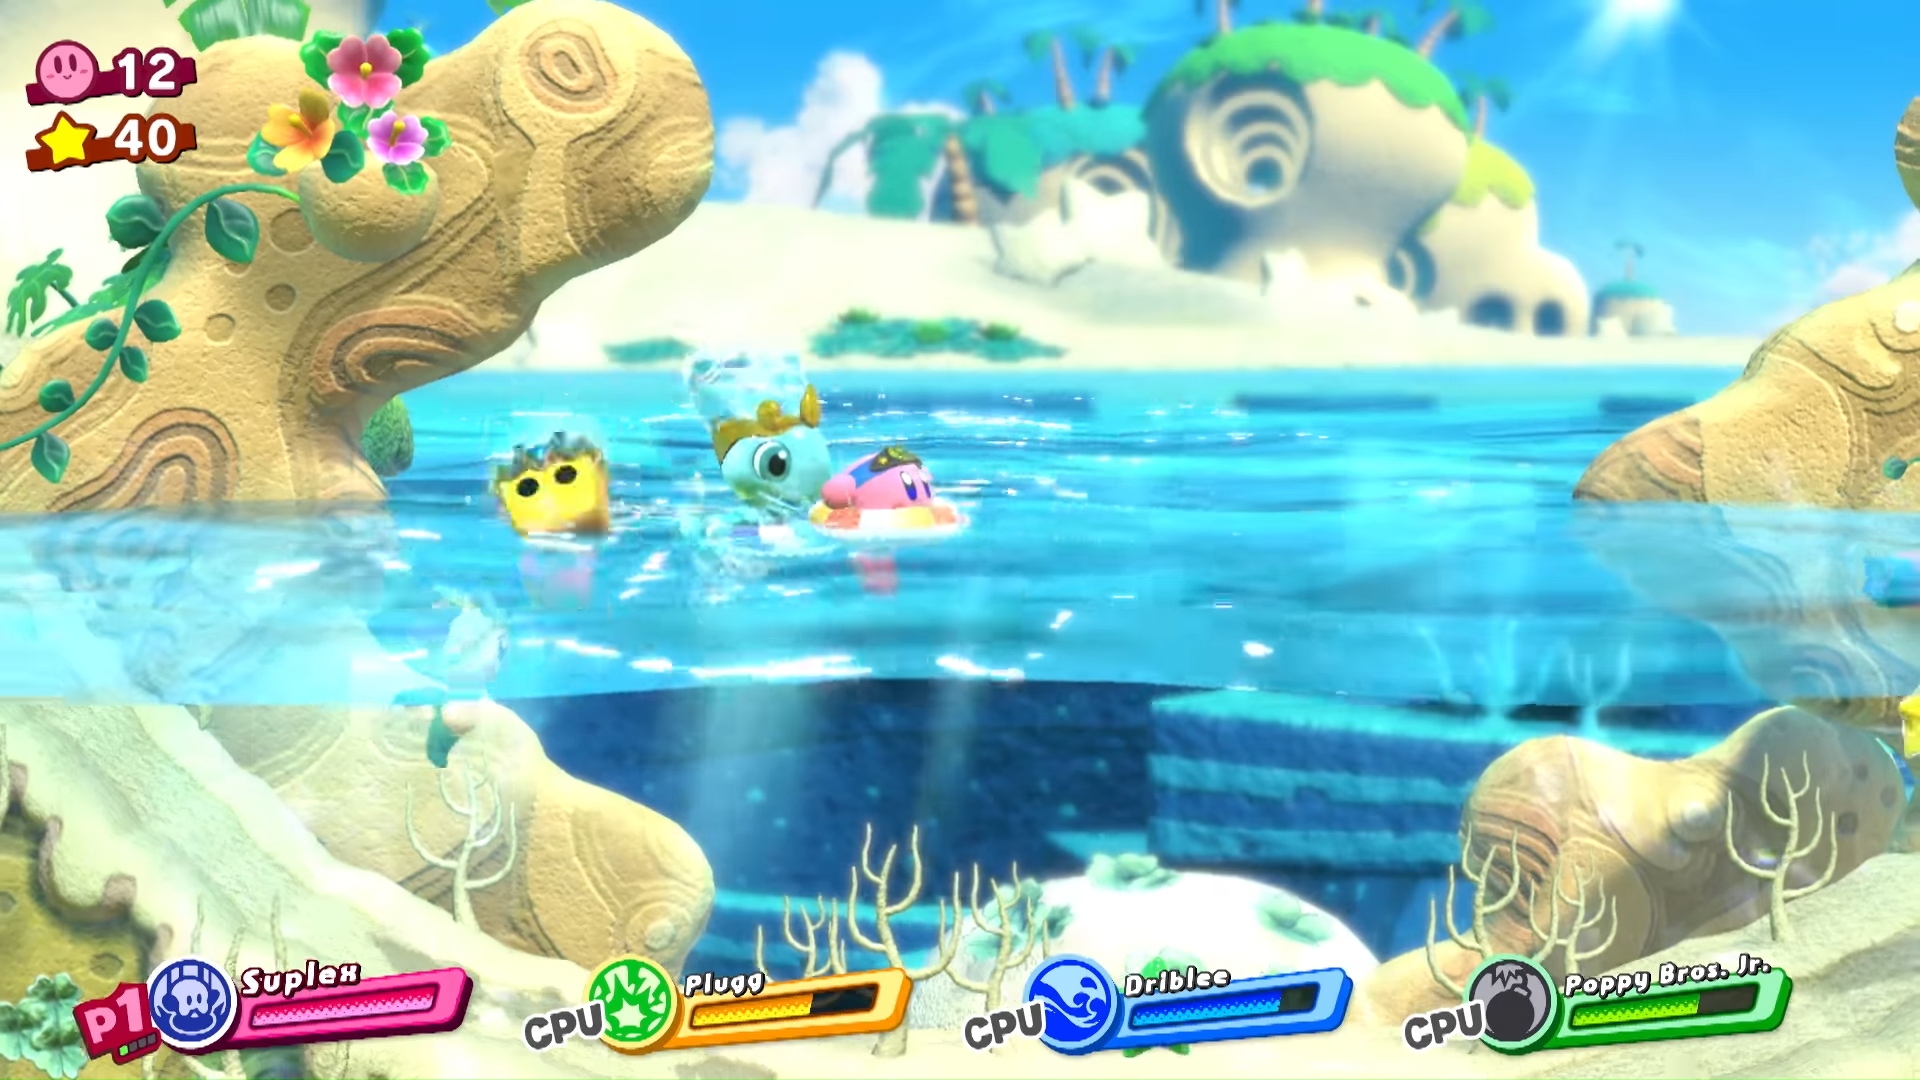 Best Kirby games: Kirby Star Allies. Image shows Kirby in a rubber ring out on the water.